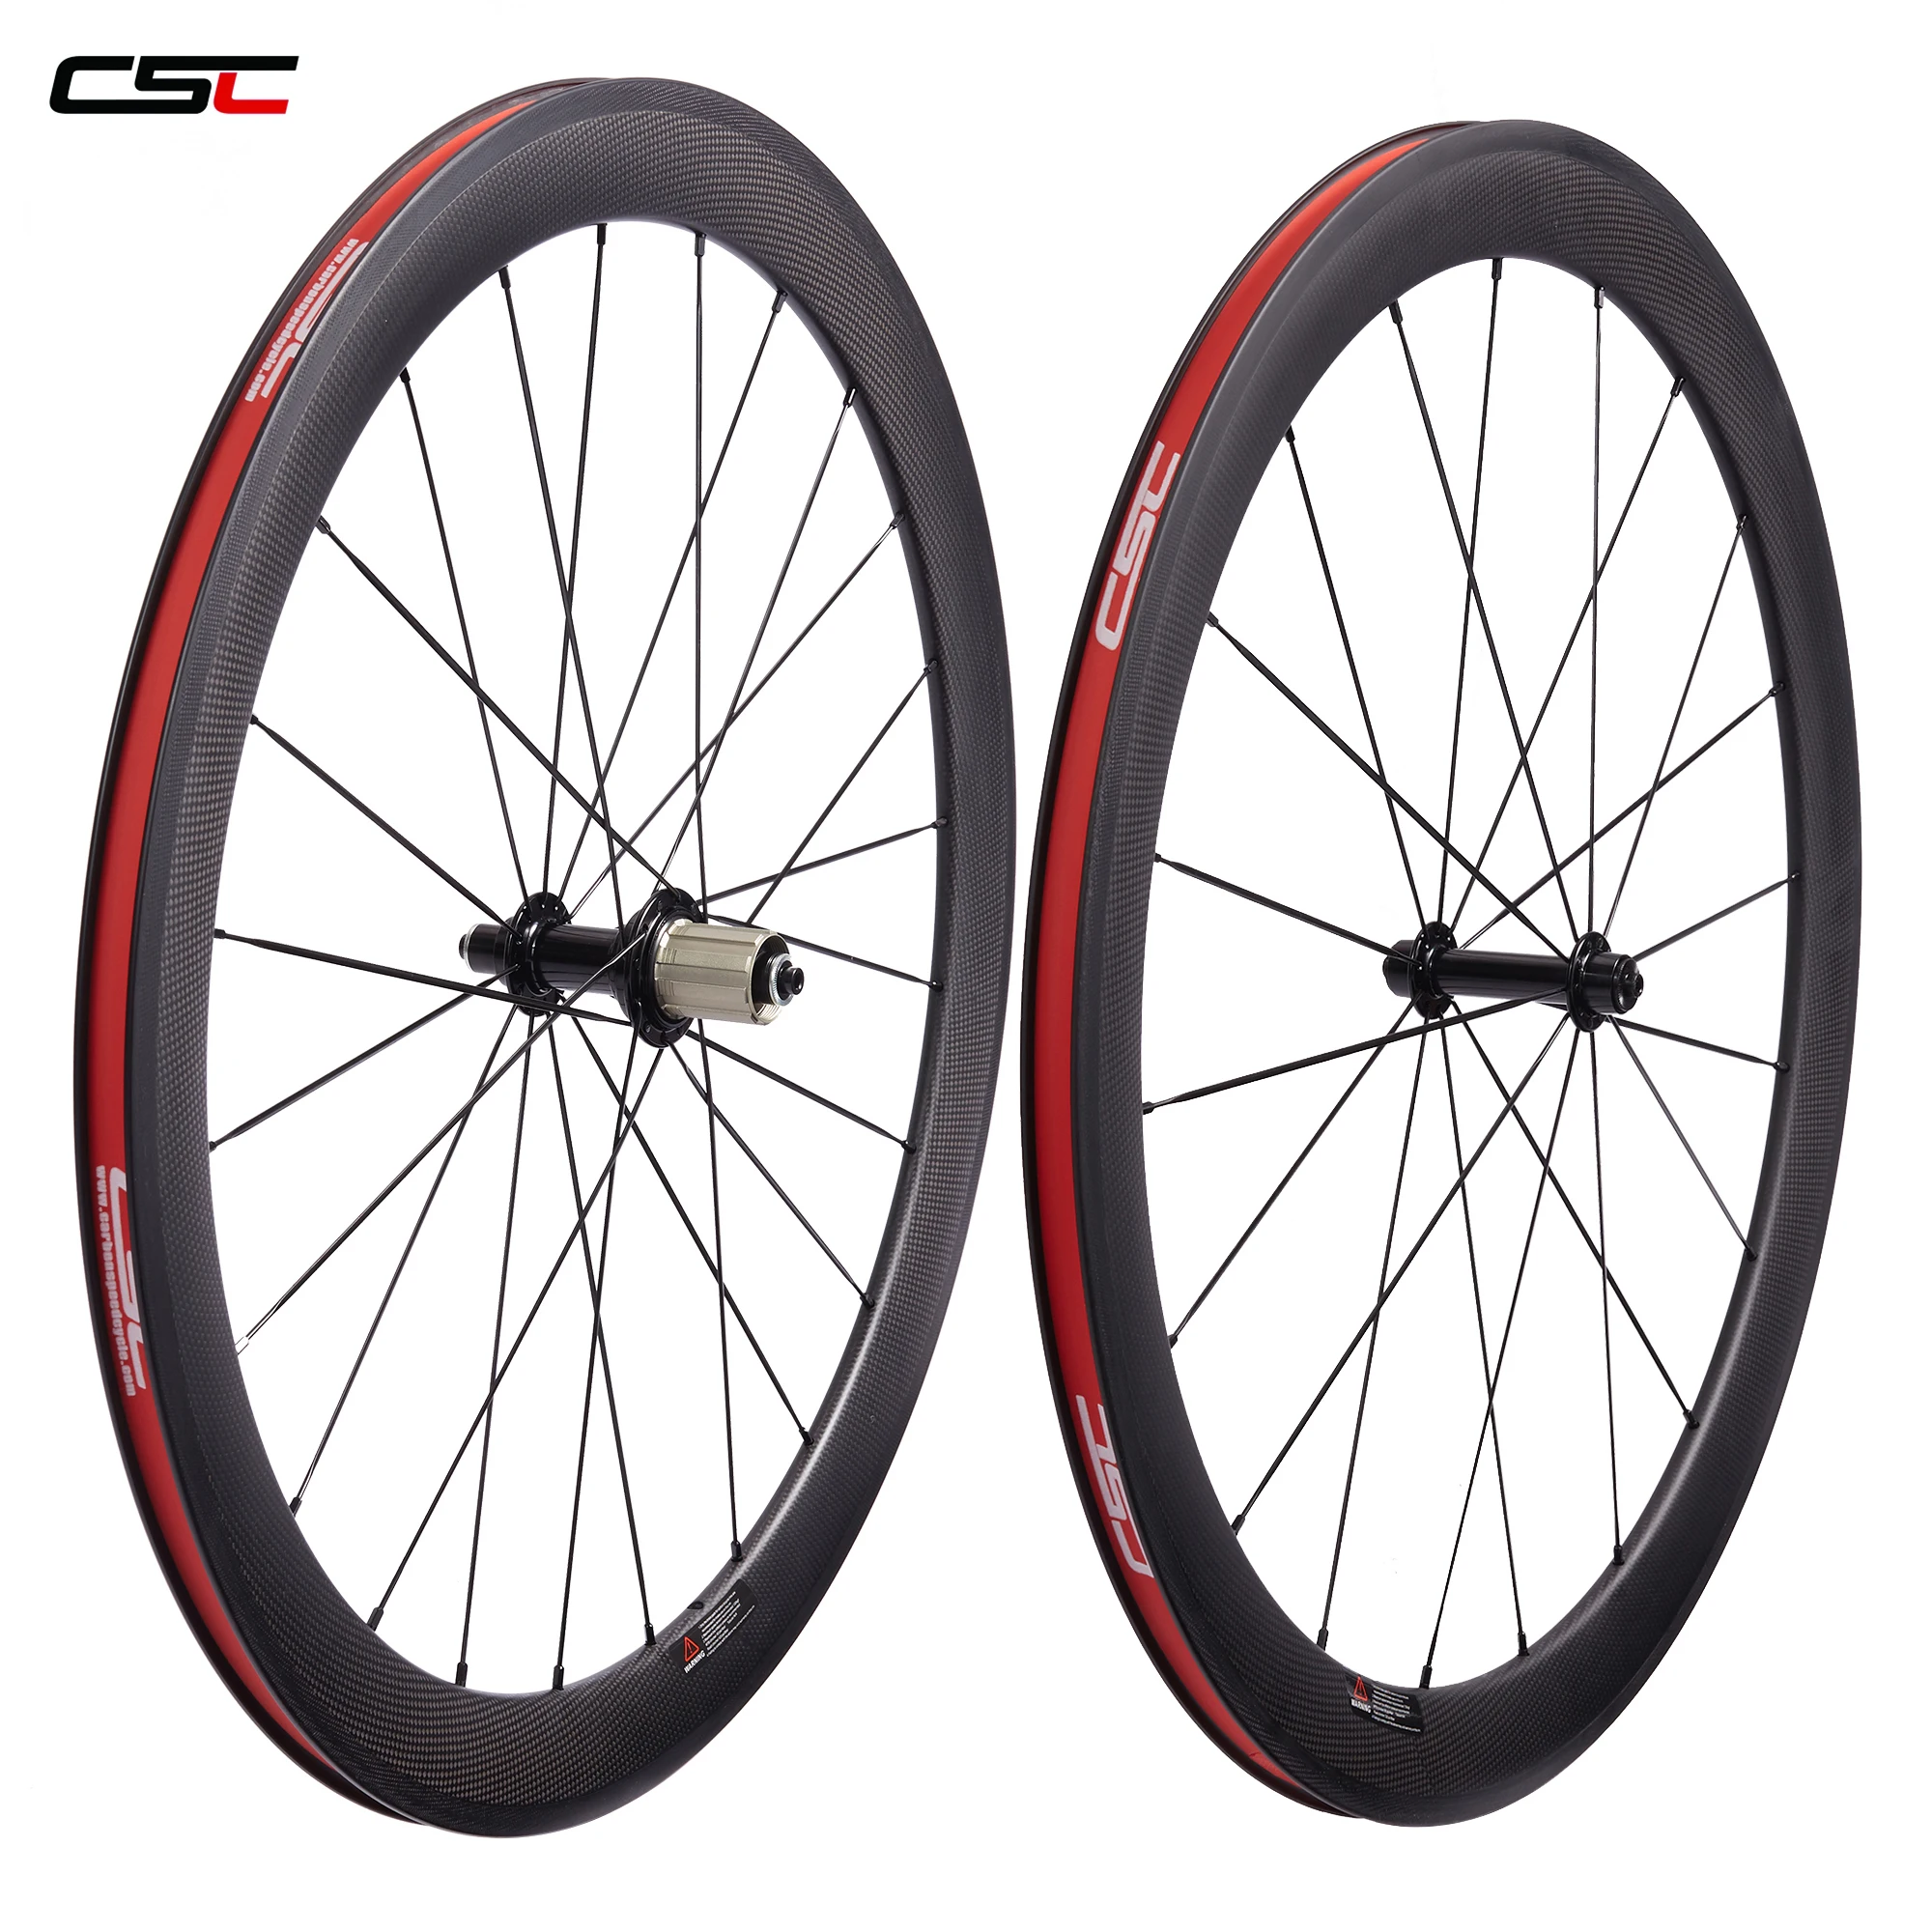 

CSC Carbon Bike Wheel Toray T800 25mm Wide U Shape 50mm Clincher Carbon Fiber Bicycle Wheelset with Powerway R13 hub from Europe